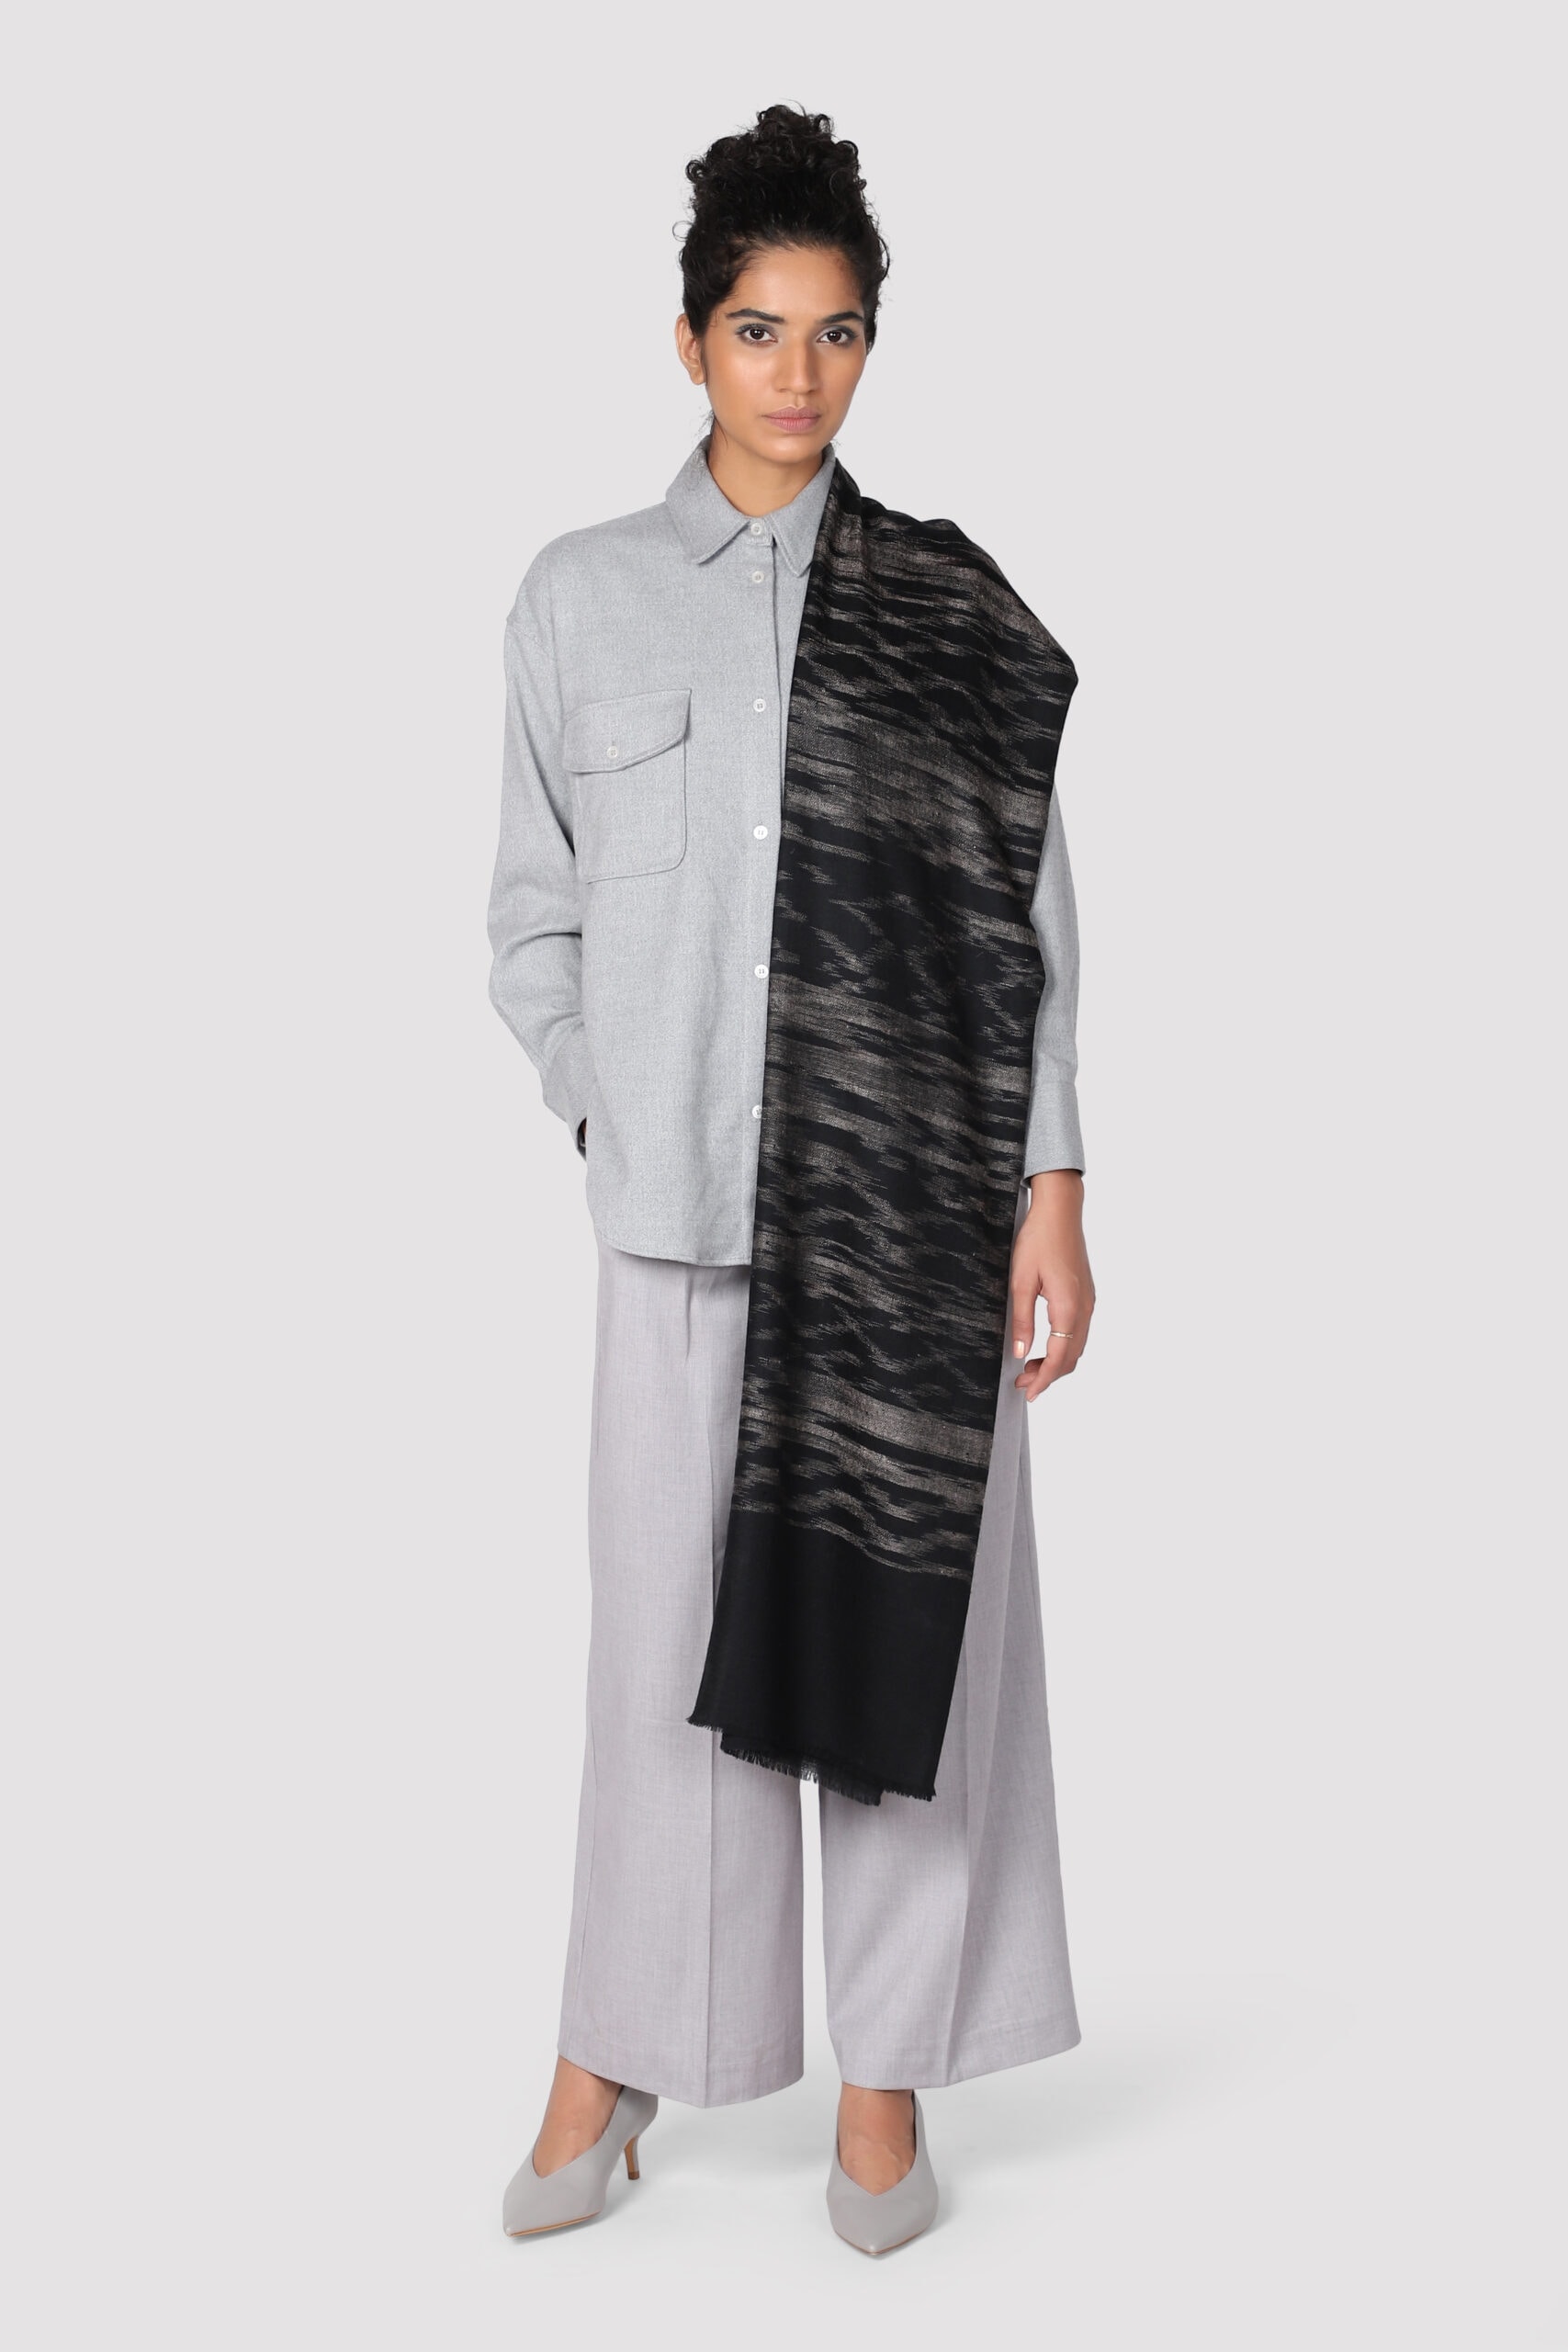 Woman in black and grey shaded ikat shawl - Me and K